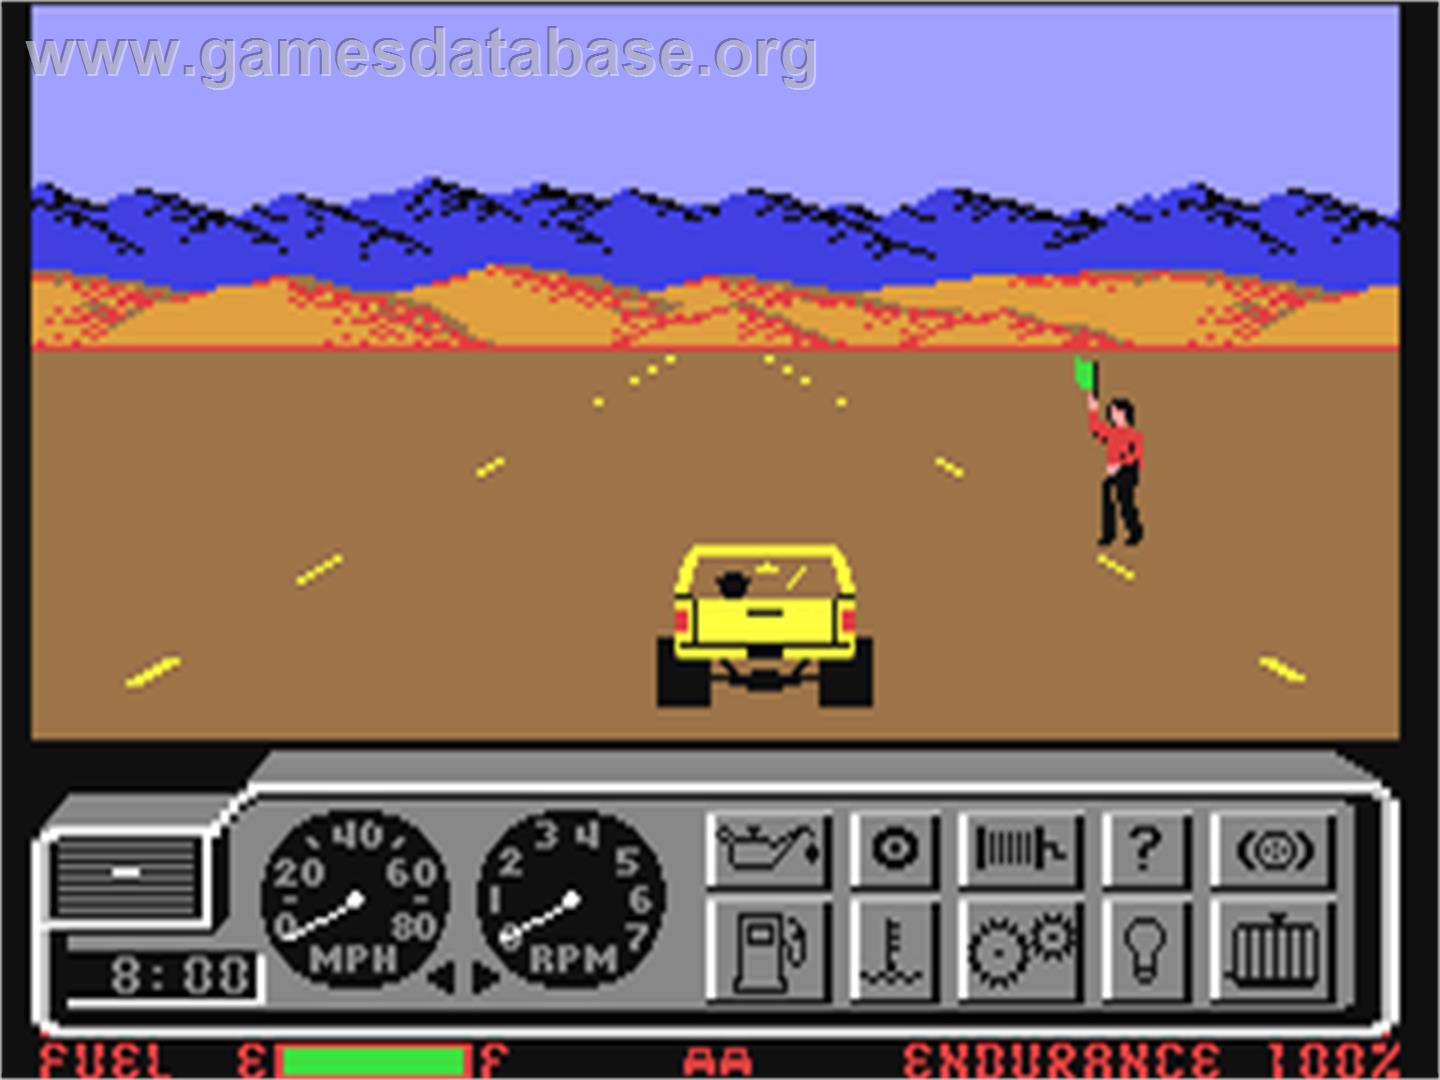 4x4 Off-Road Racing - Commodore 64 - Artwork - In Game